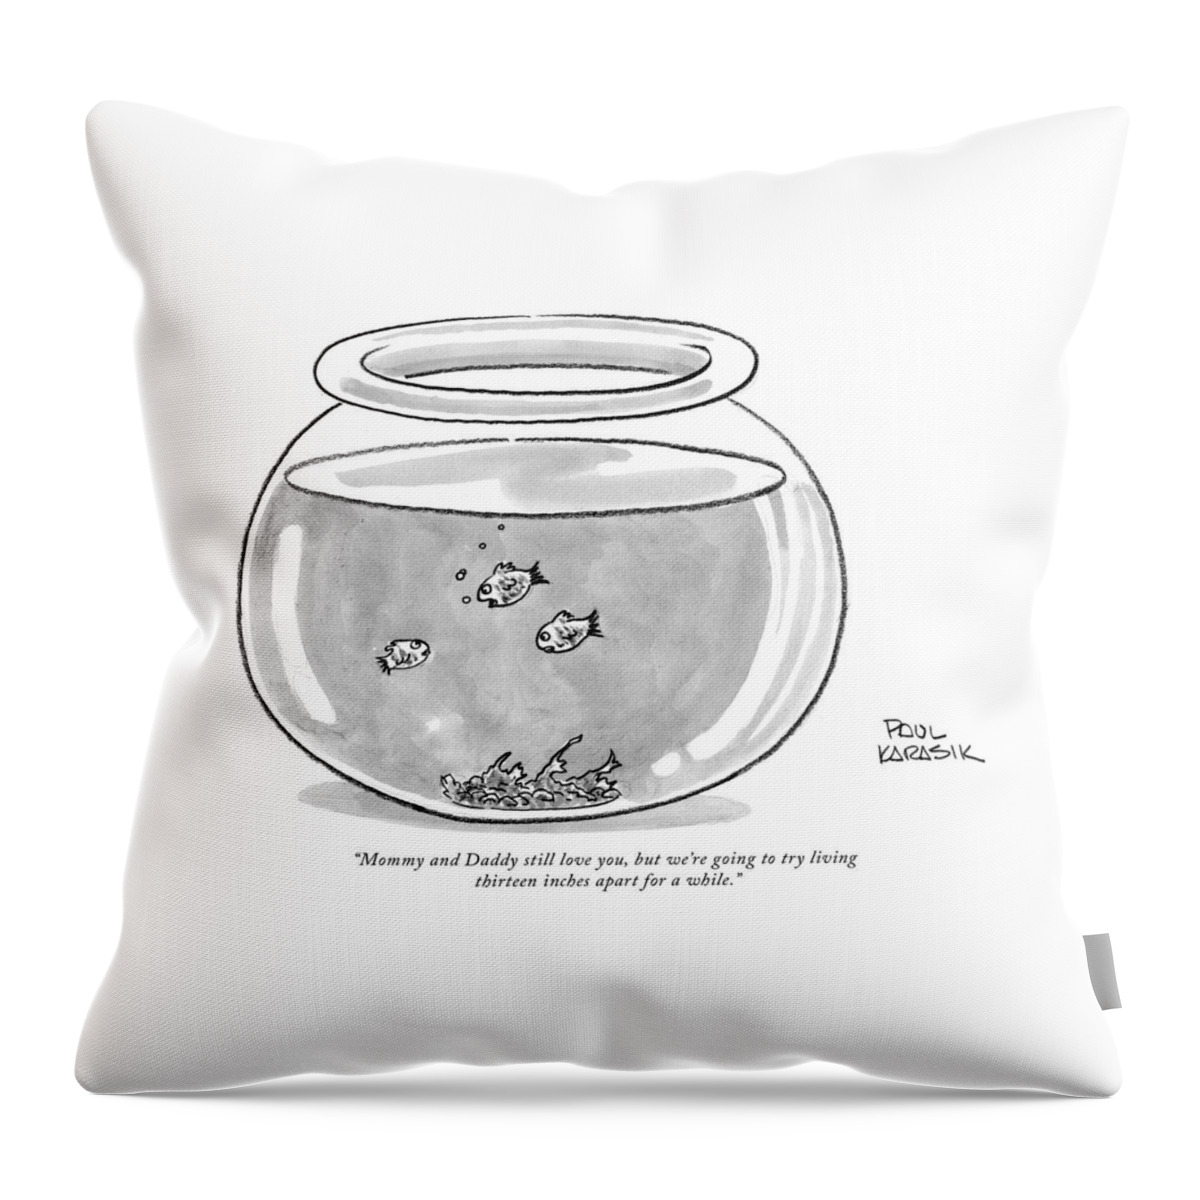 Fishbowl Mommy And Daddy Still Love You Throw Pillow